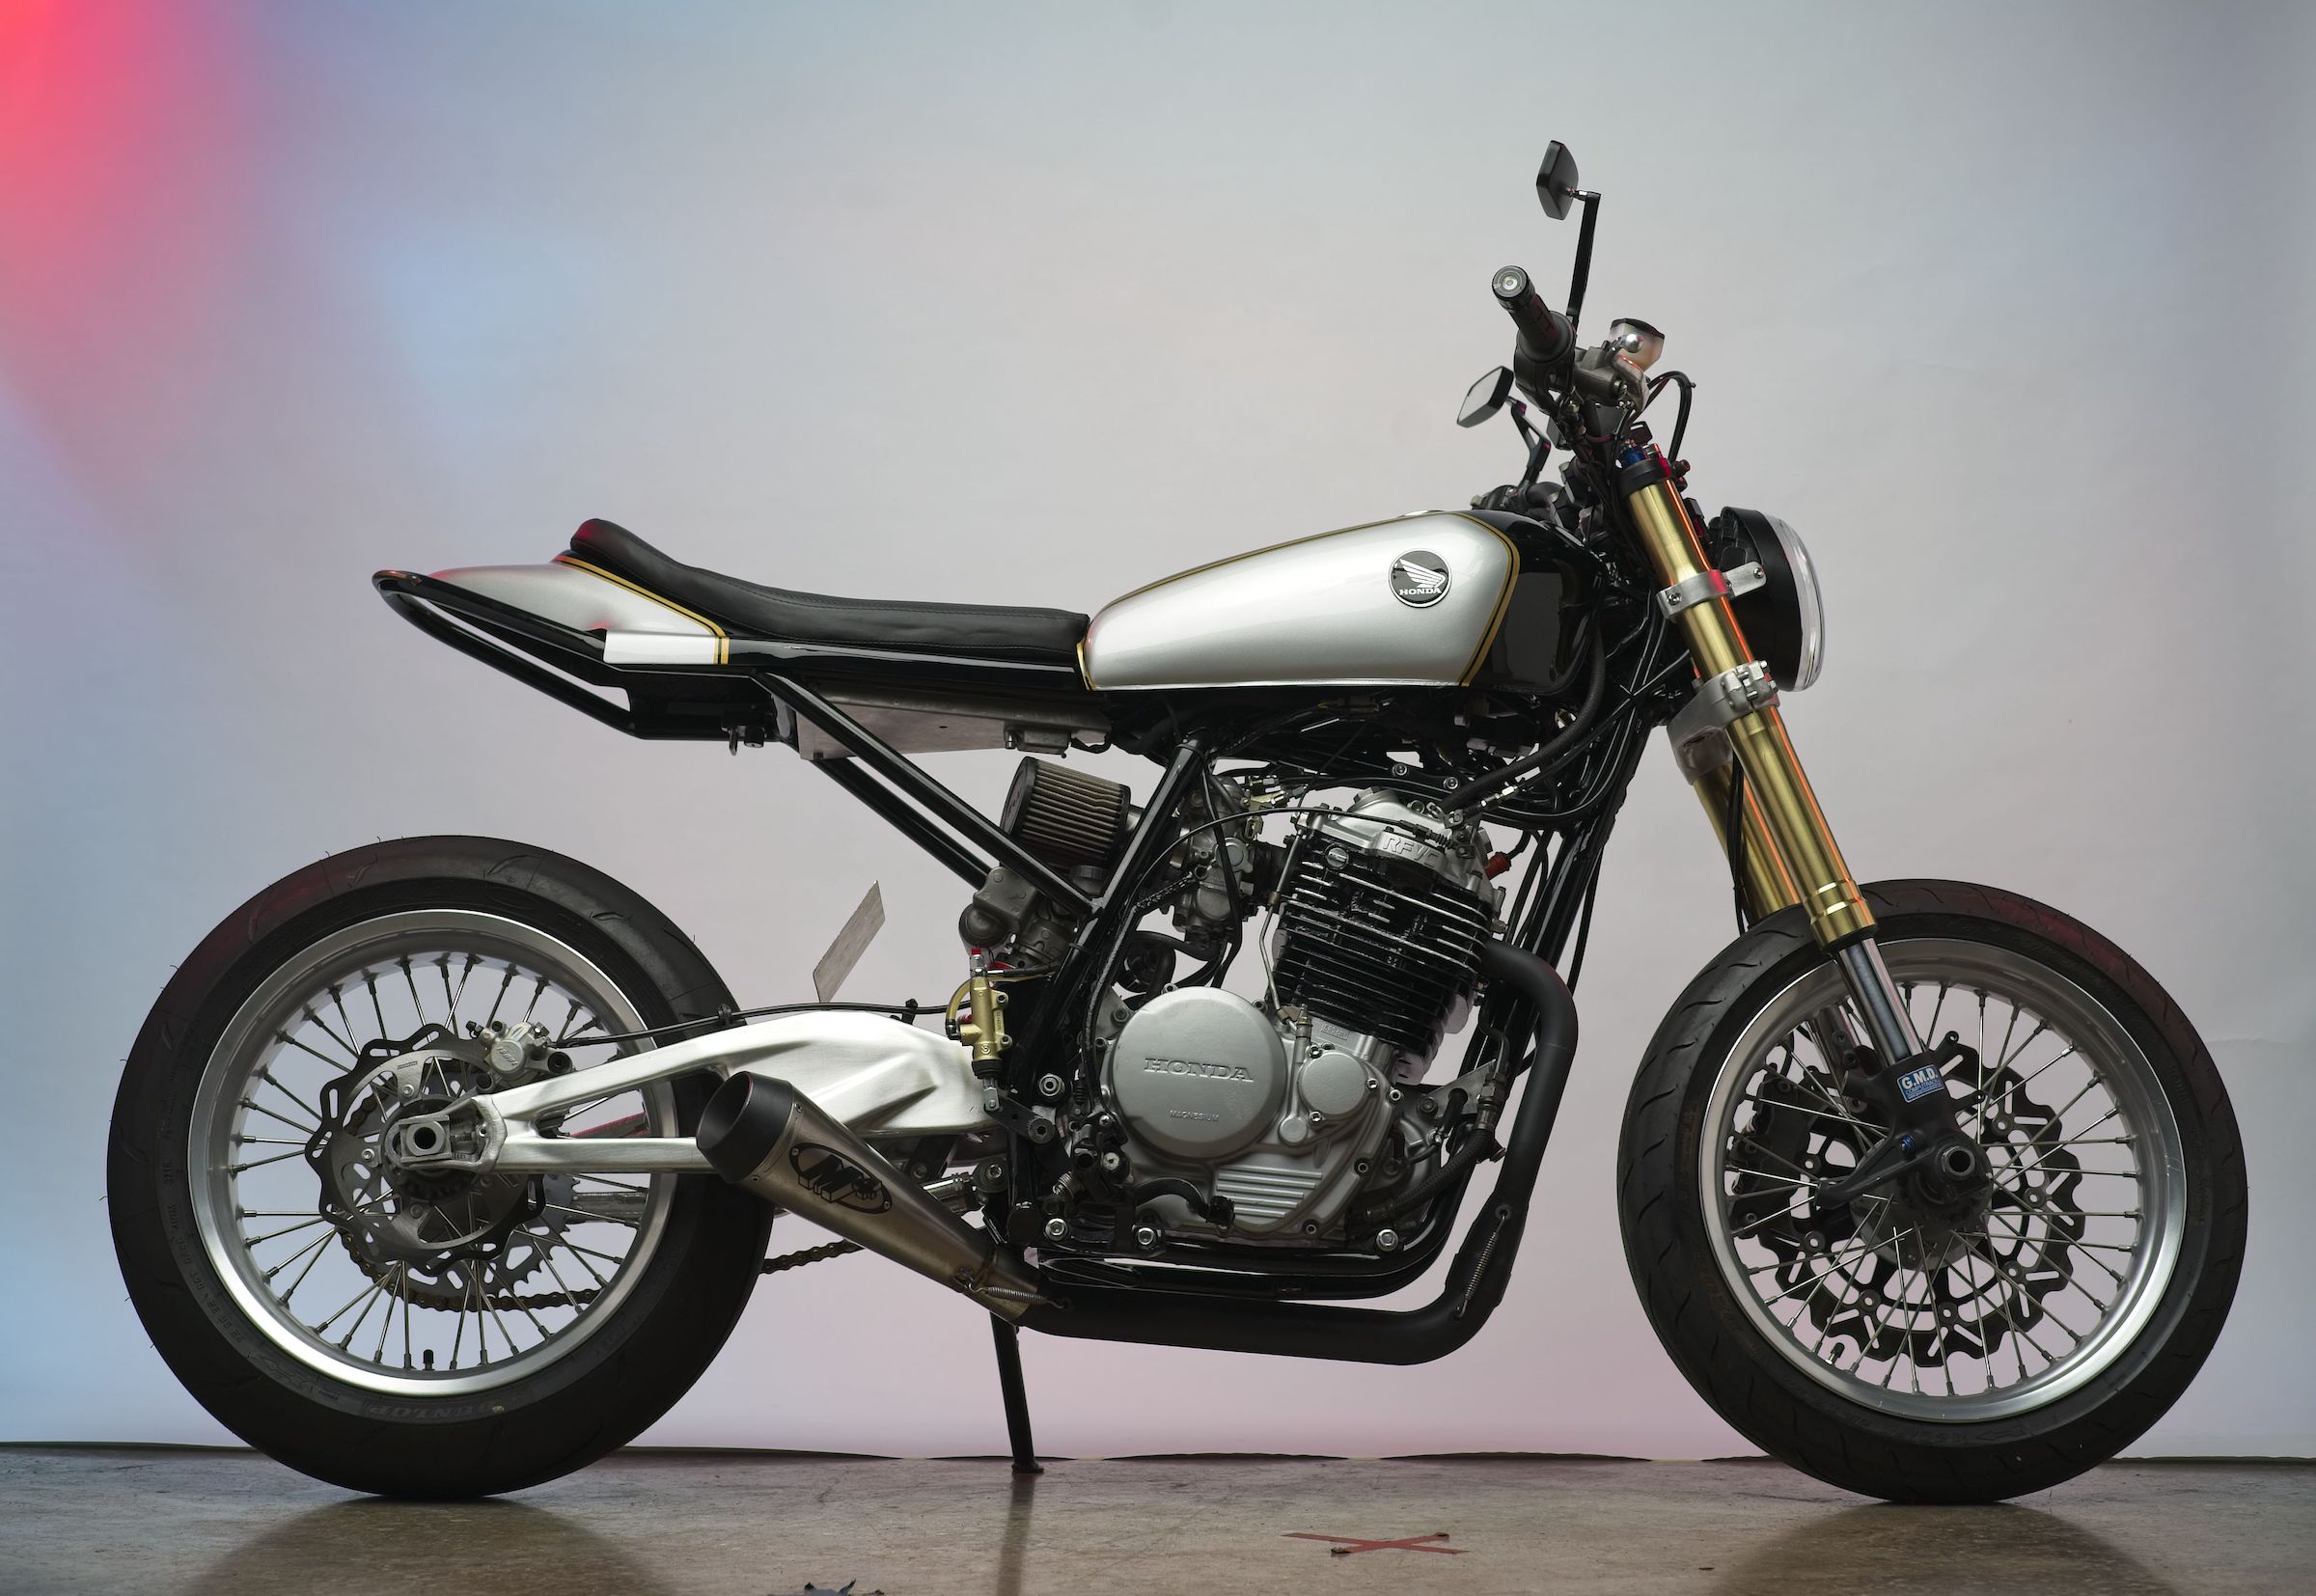 Father & Son Project - The Lloyd Brothers Honda XL600R Street Tracker